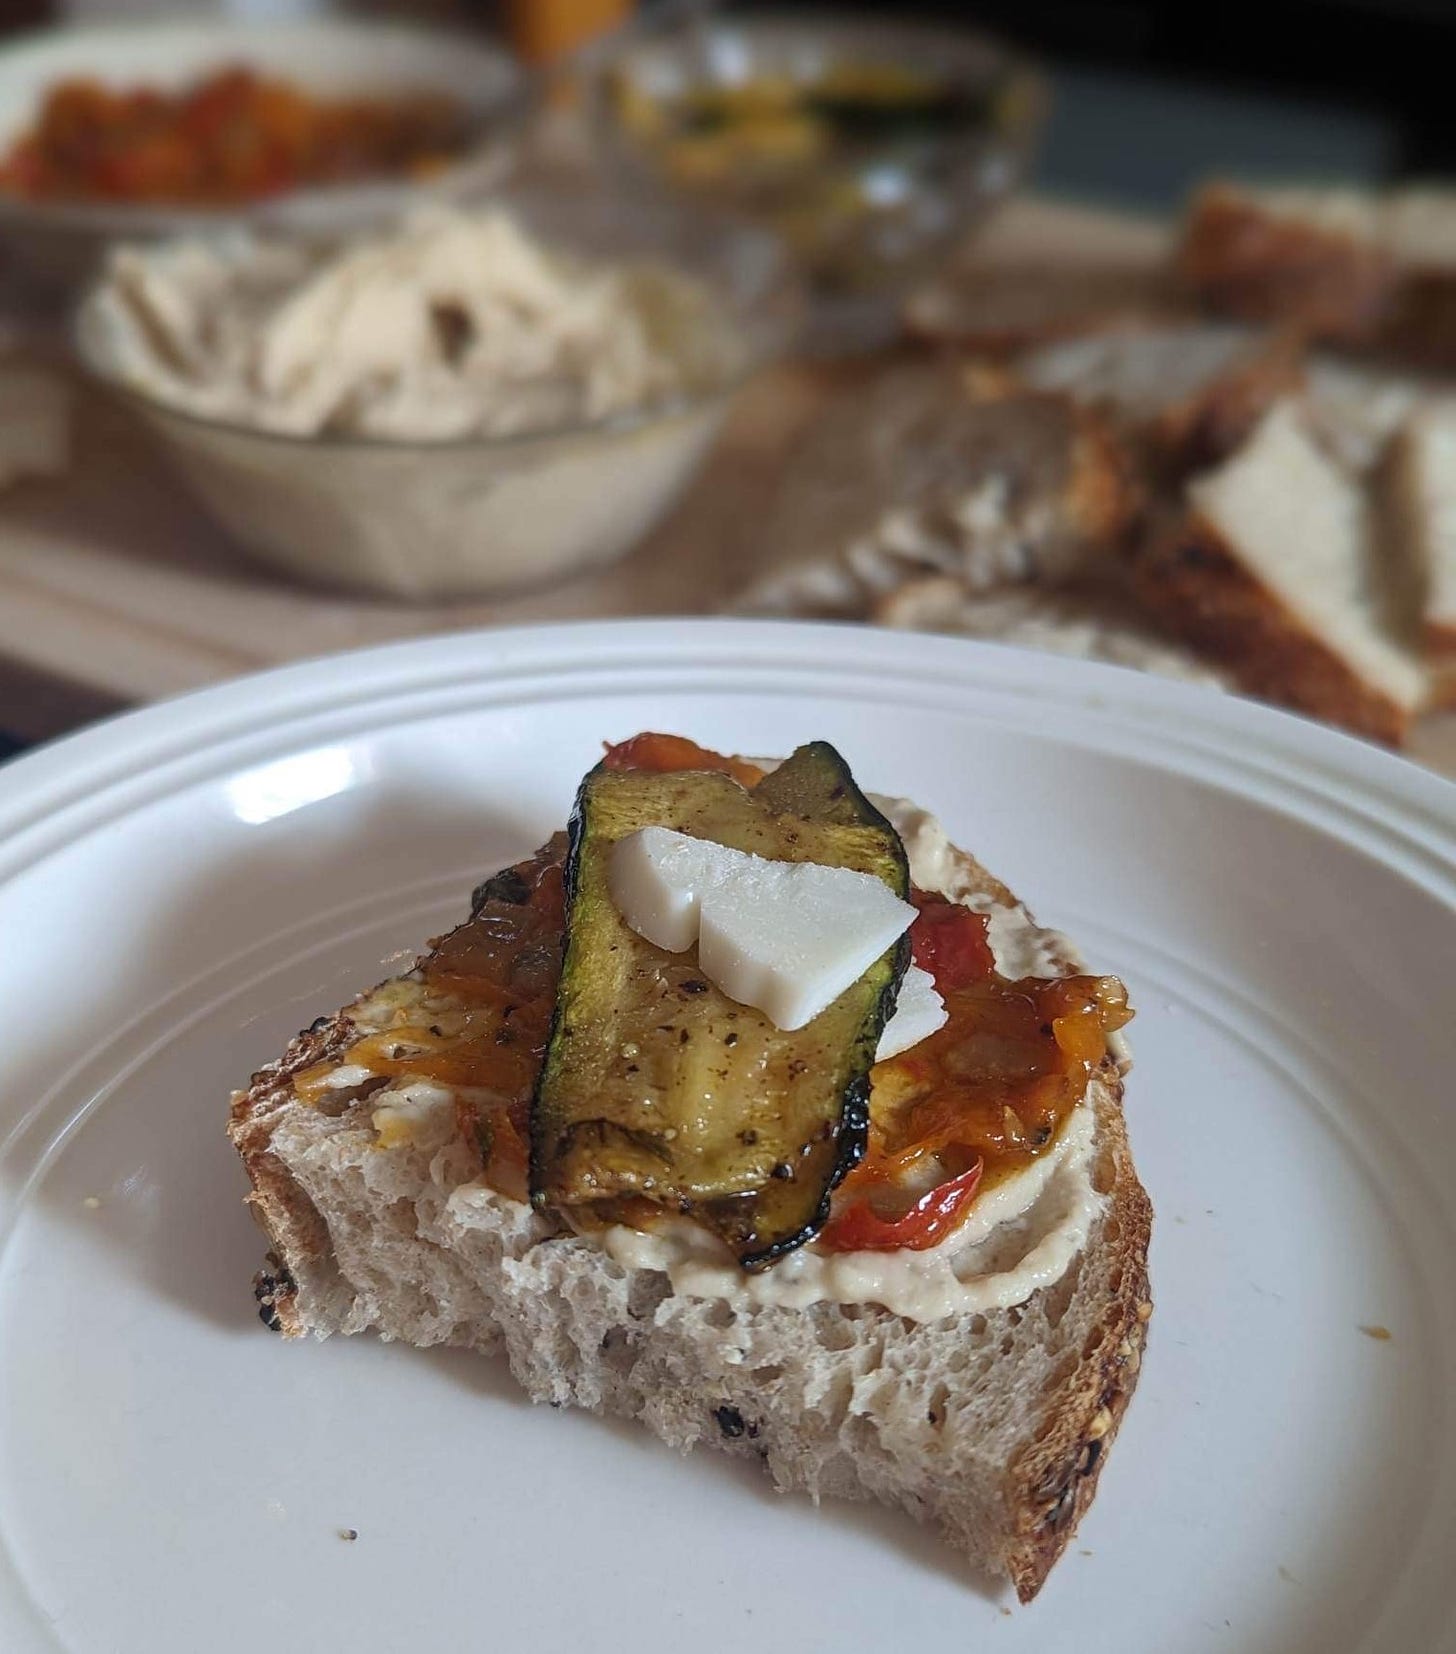 A piece of bread topped with white bean dip, roasted red pepper, grilled zucchini and a vegan Romano cheese. In the background of the image are bowls of dip and slices of bread.